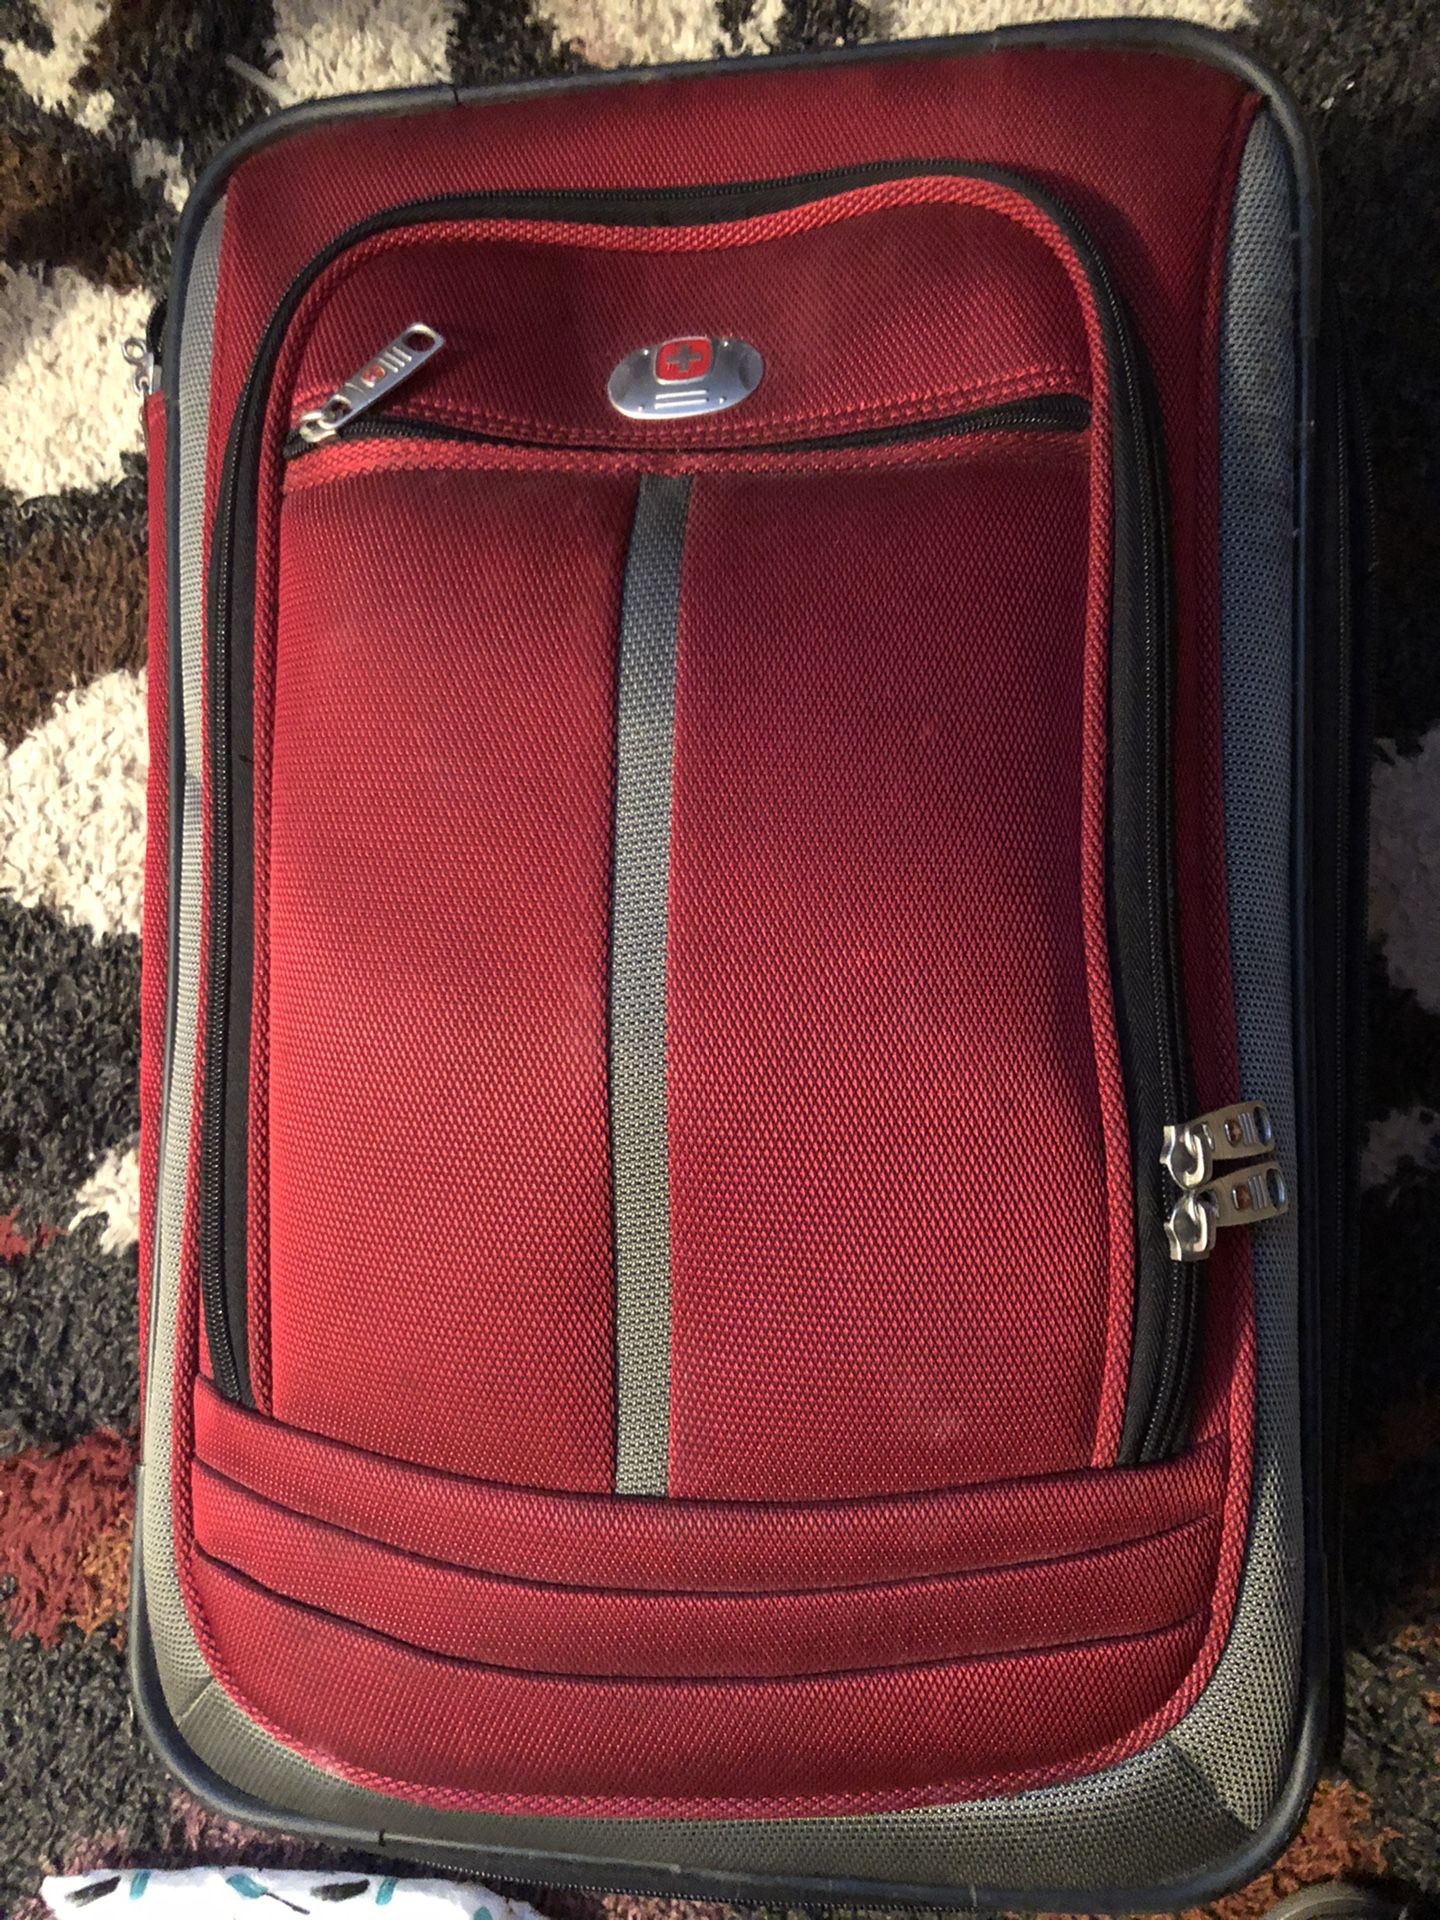 Swiss red suitcase